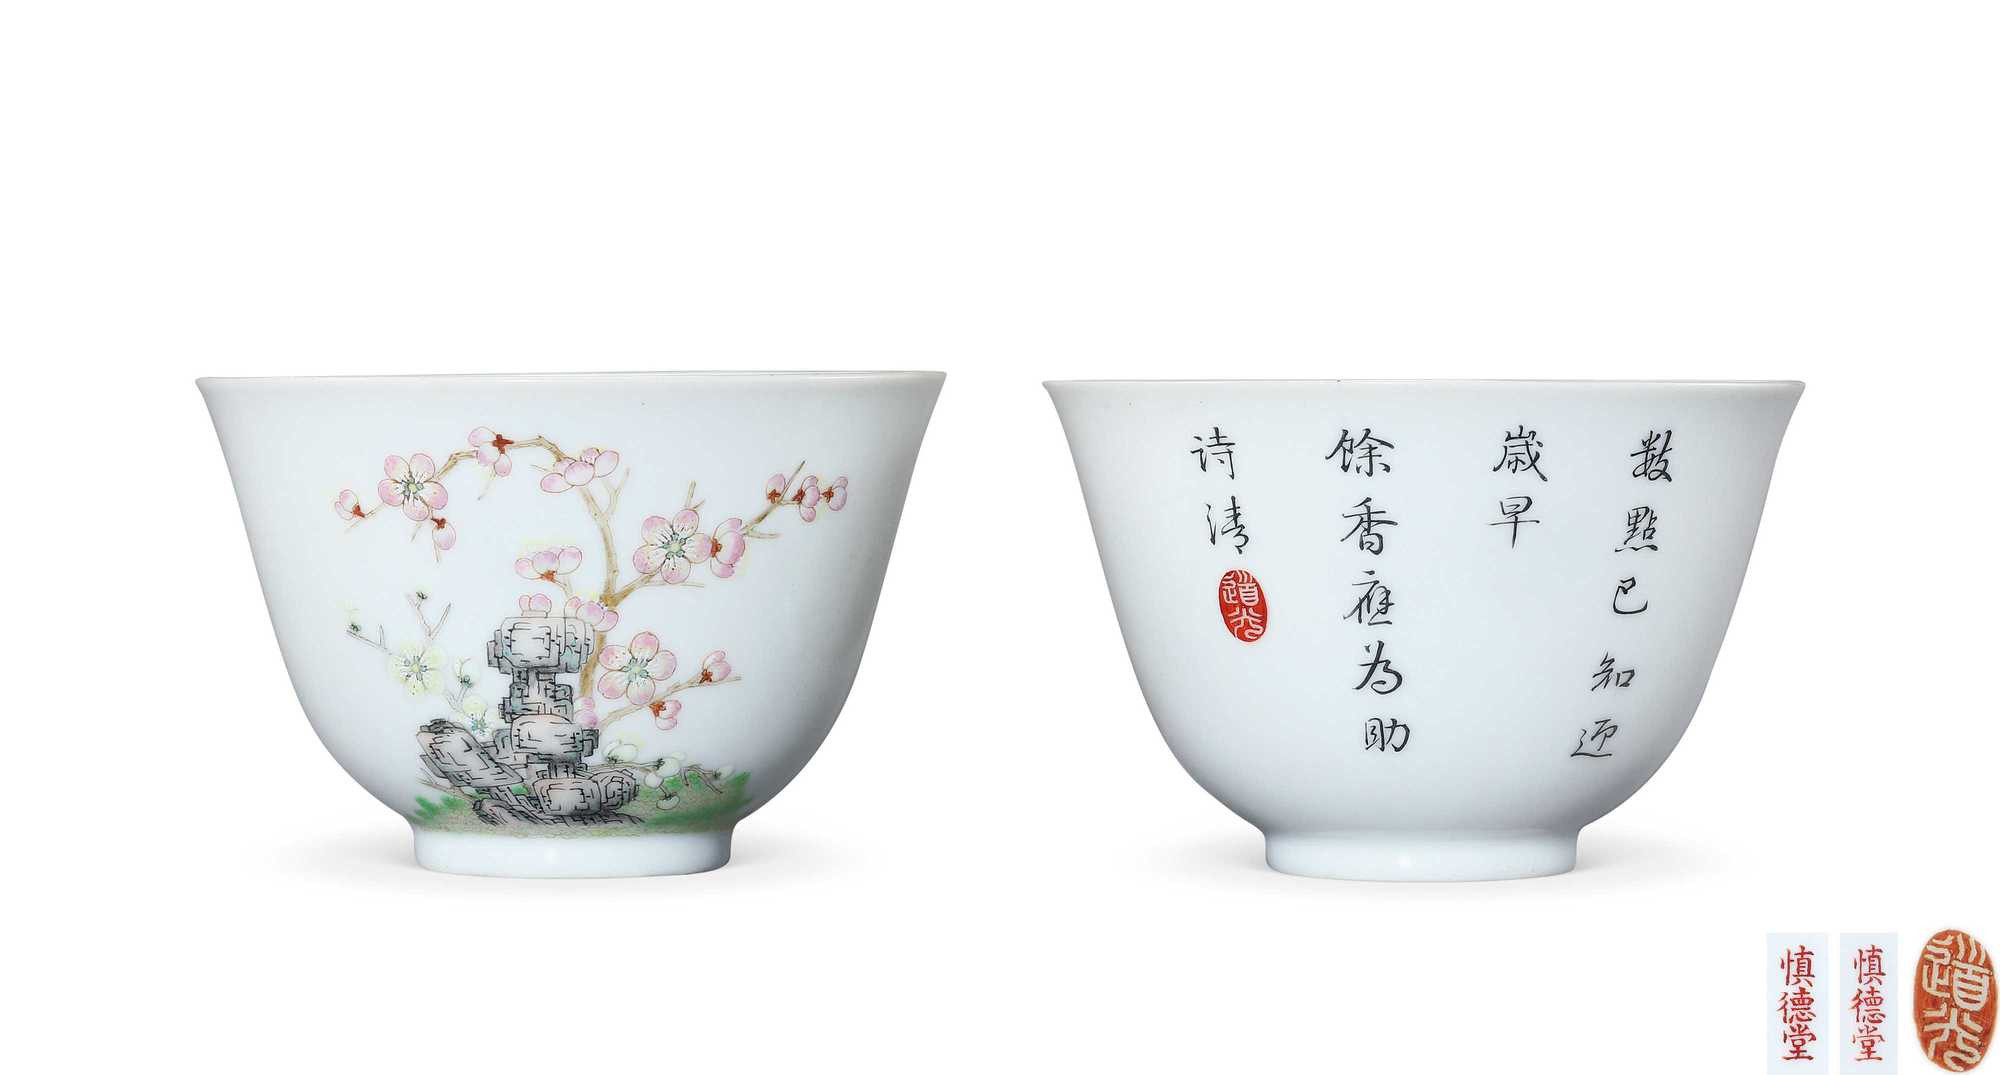 A PAIR OF FAMILLE ROSE CUPS WITH DESIGN OF PLUM BLOSSOM AND POEM INSCRIPTION